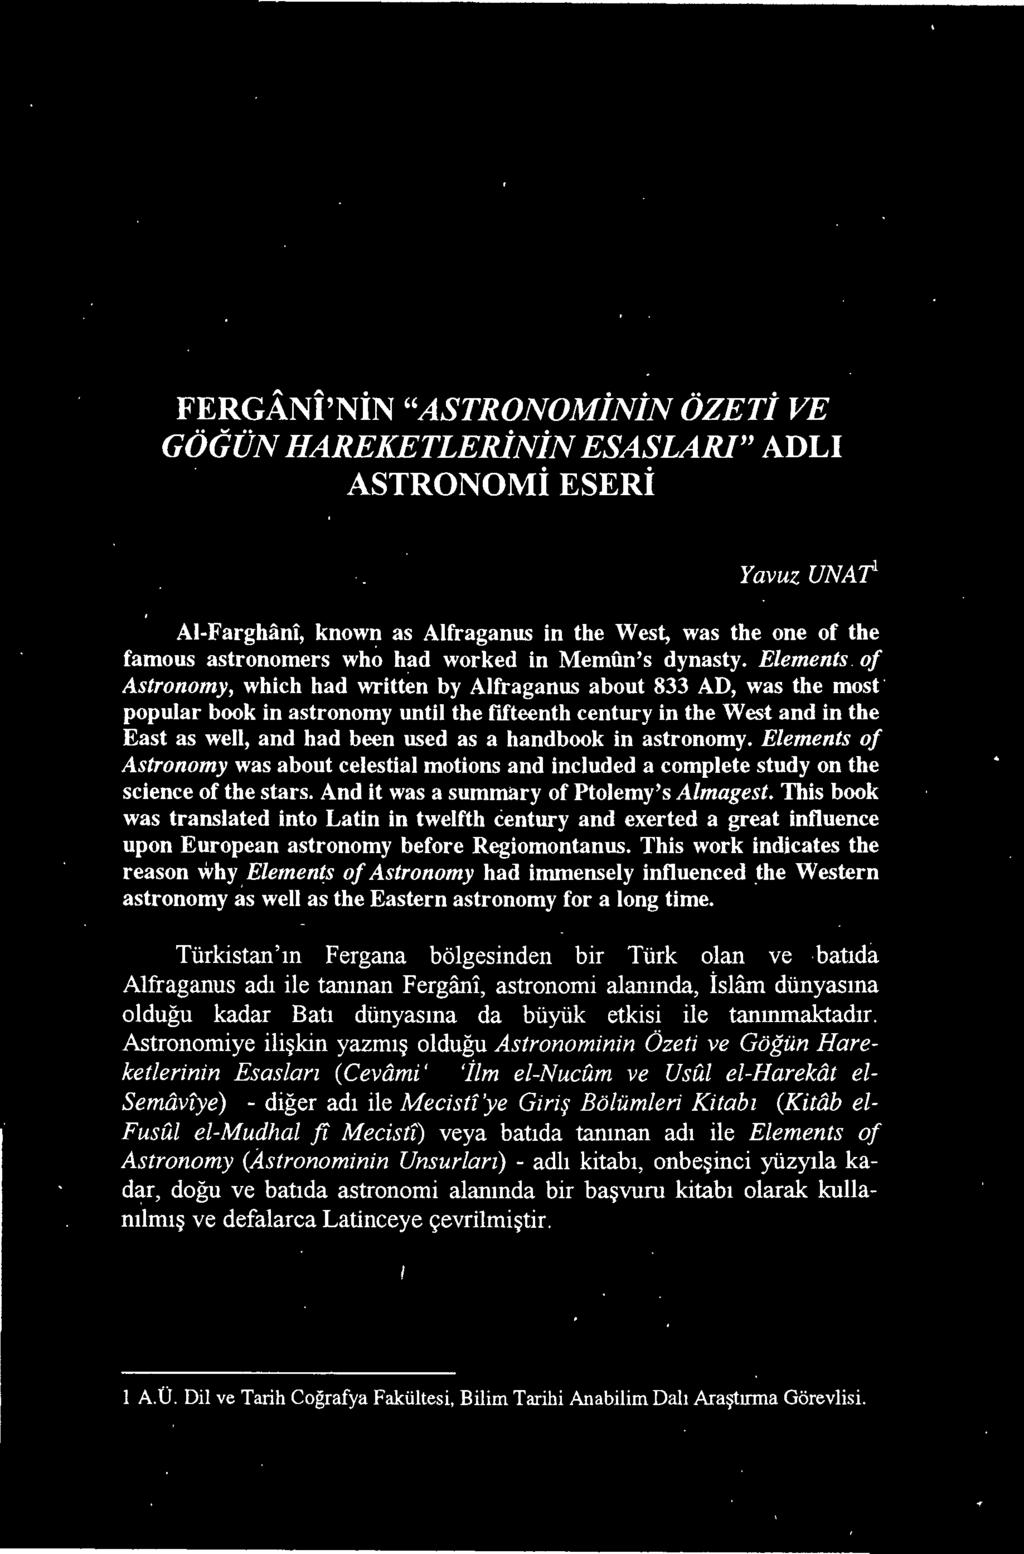 And it was a summary of Ptolemy's Almagest, This book was translated into Latin in twelfth centuryand exerted a great influence upon European astronomy before Regiomontanus.